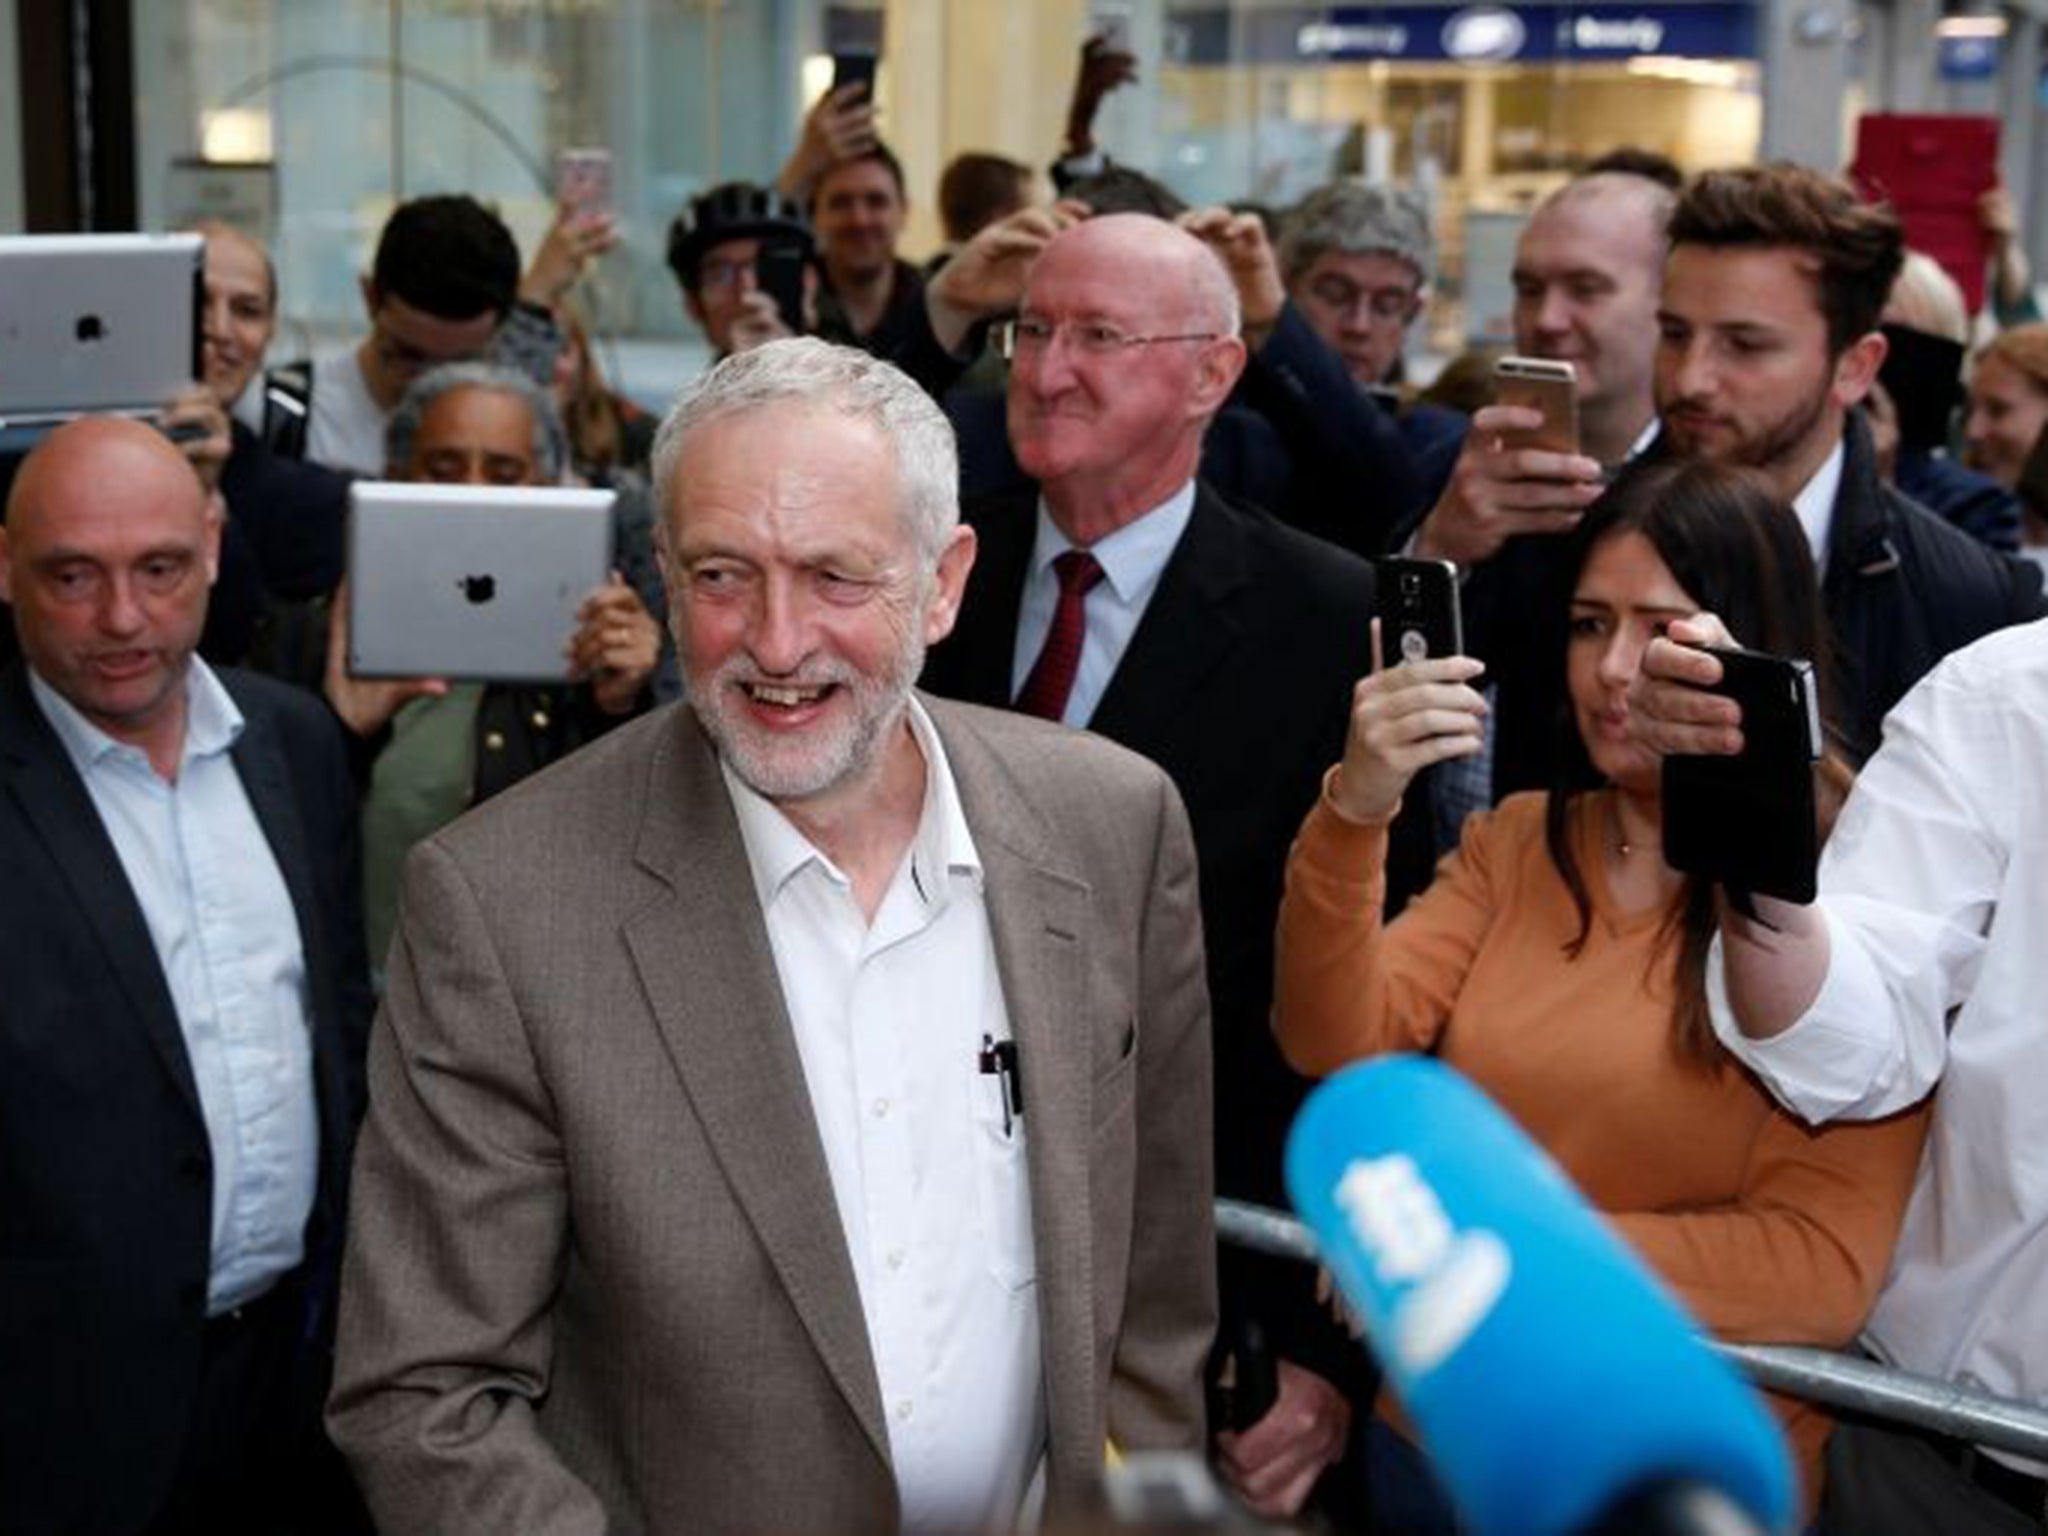 Jeremy Corbyn will get an automatic place on the ballot paper, the NEC has ruled